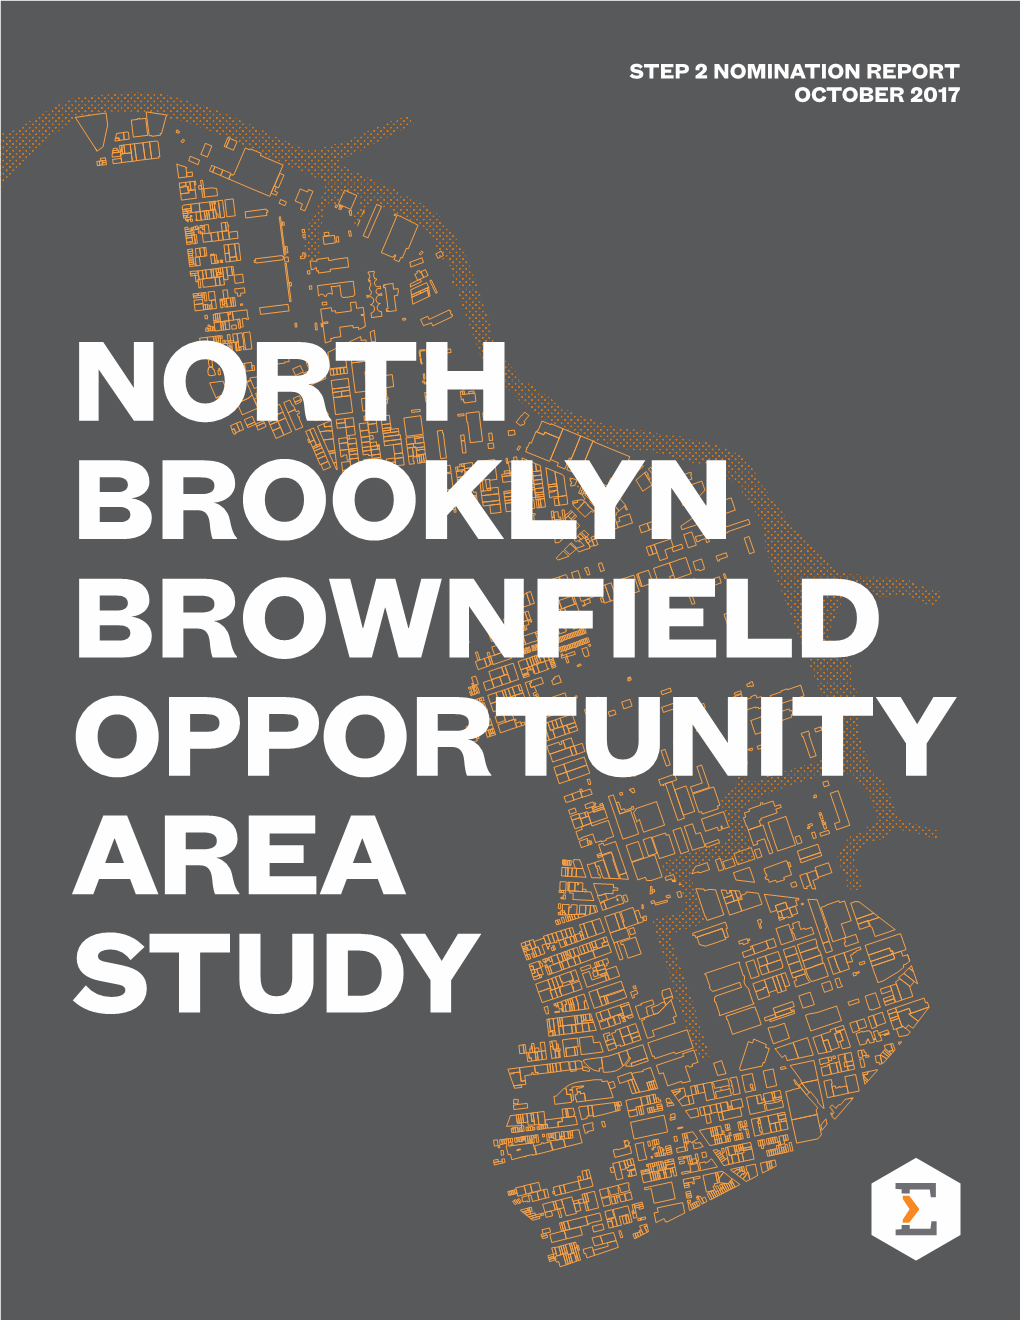 North Brooklyn Brownfield Opportunity Area Study Step 2 Nomination Report October 2017